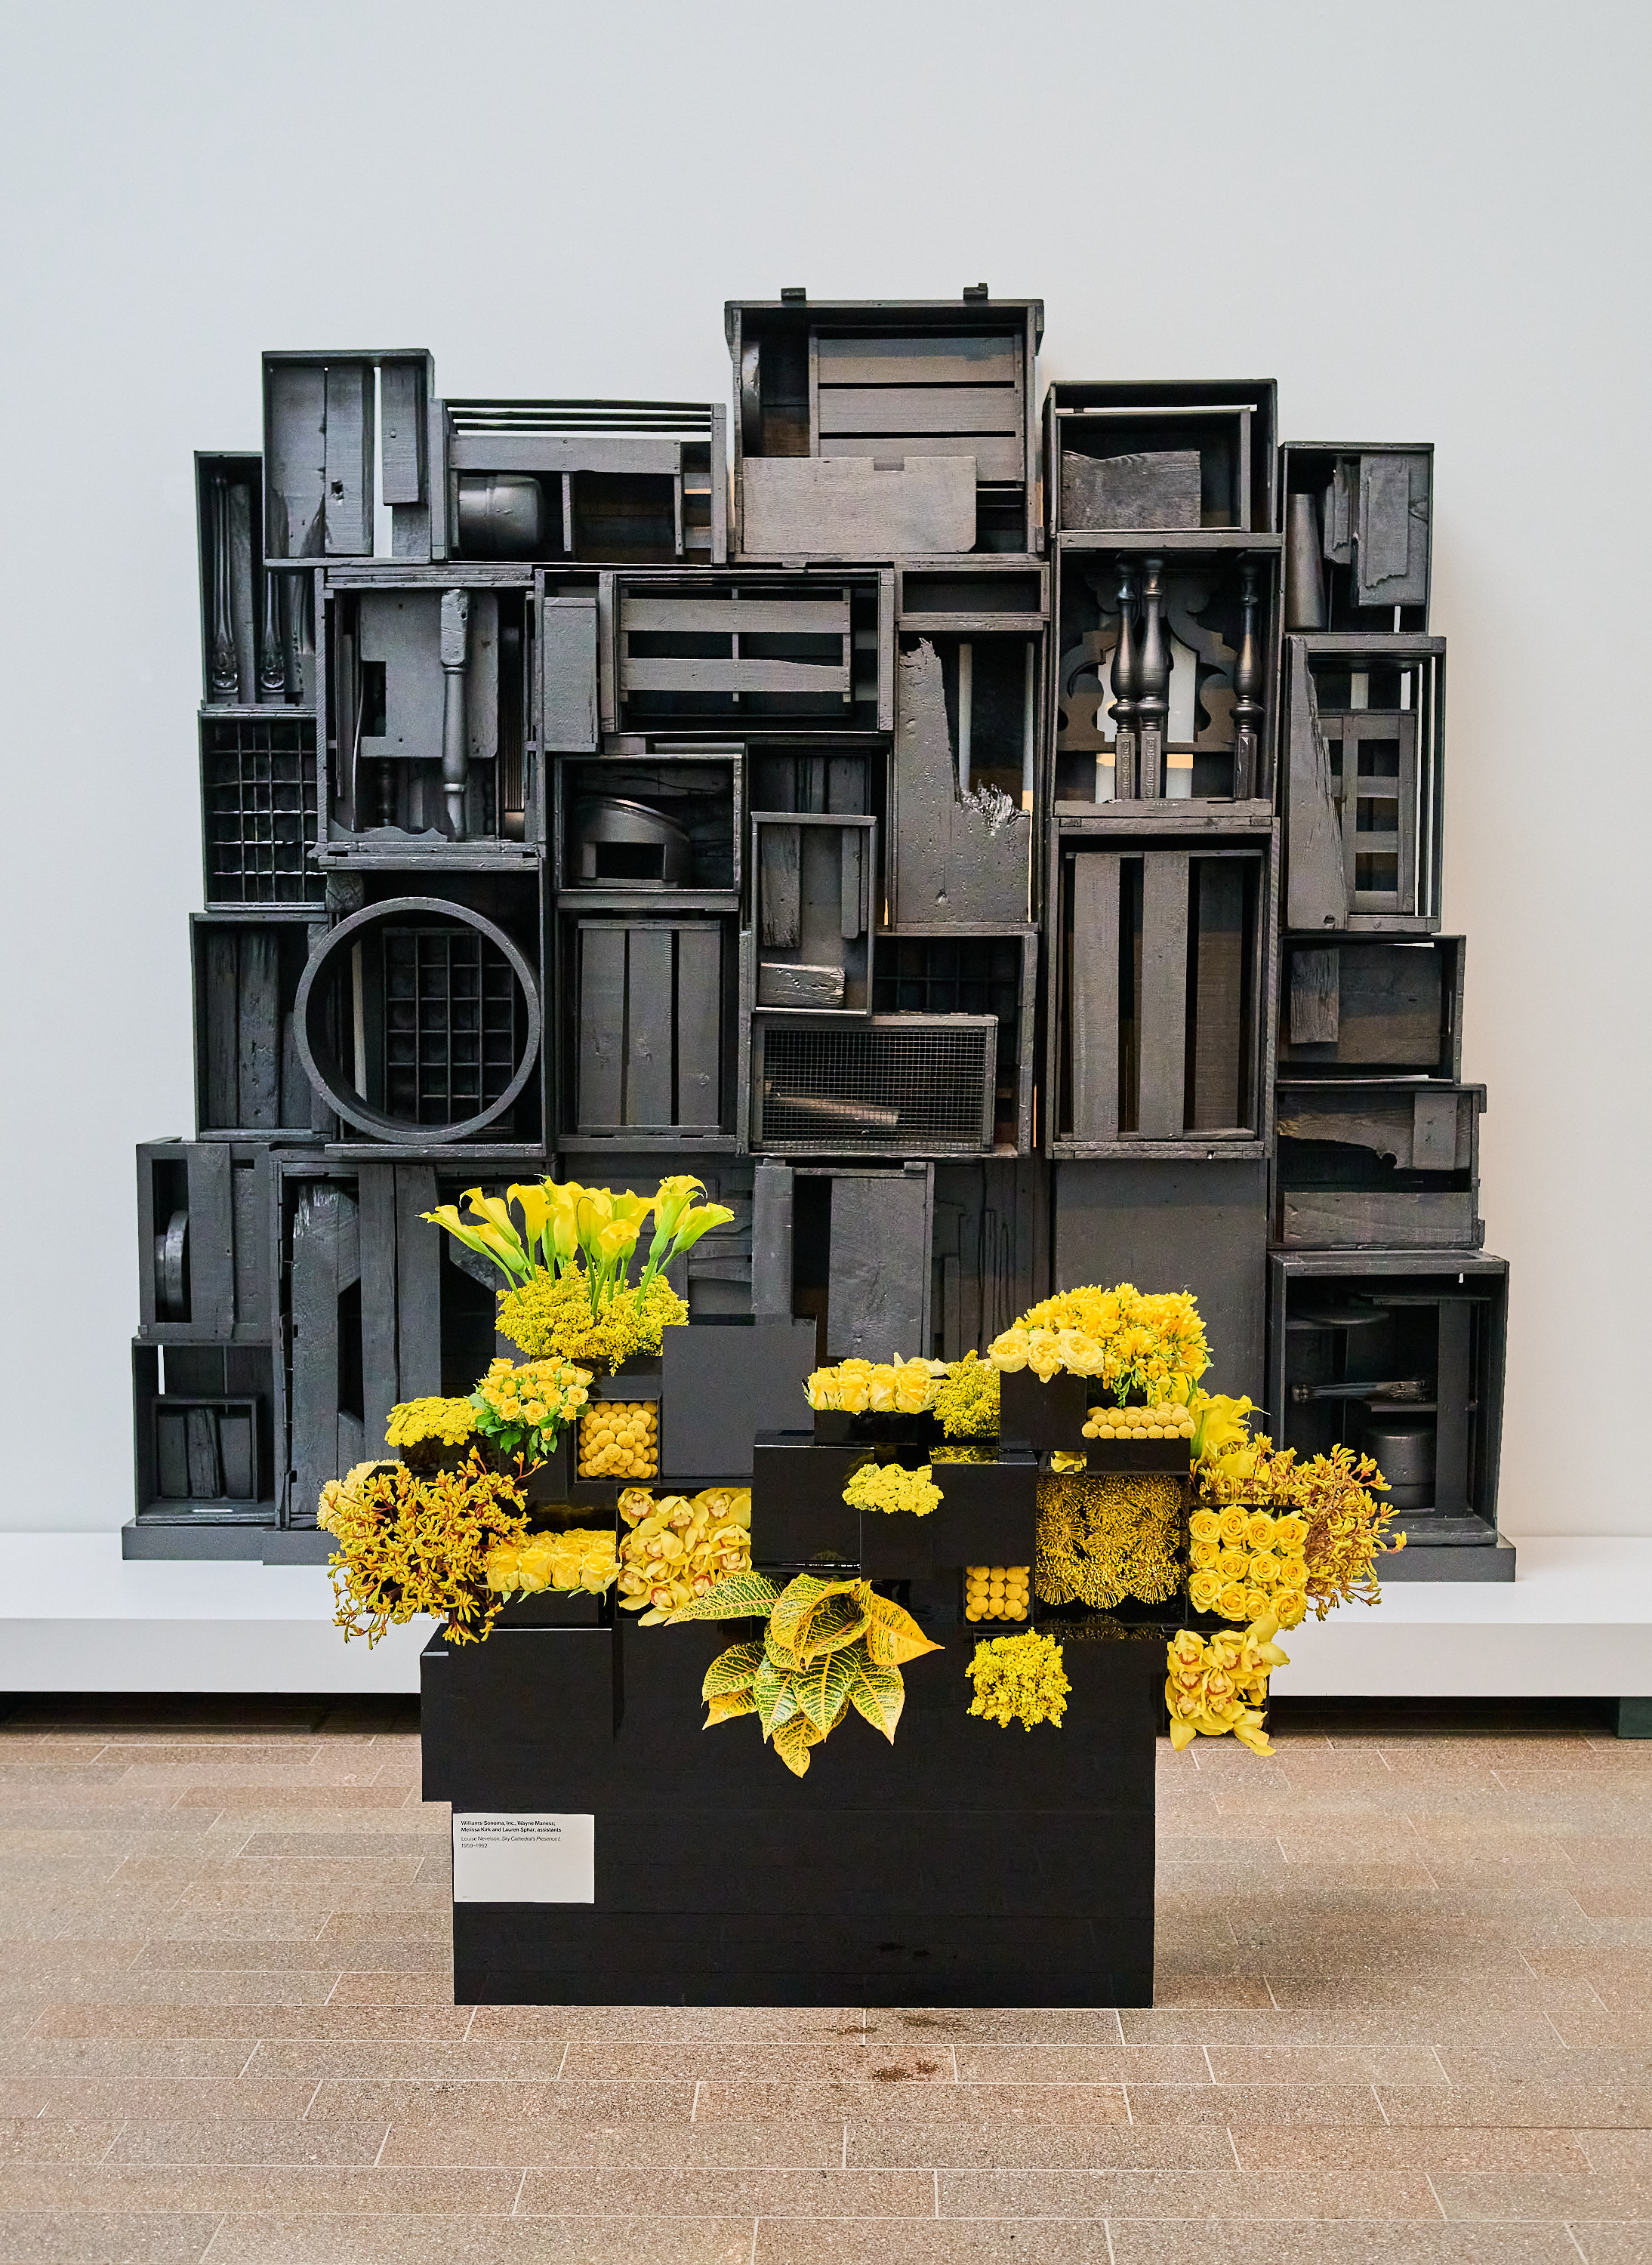 The image shows an abstract art installation with stacked black boxes and compartments filled with assorted yellow flowers and foliage, displayed against a white wall.